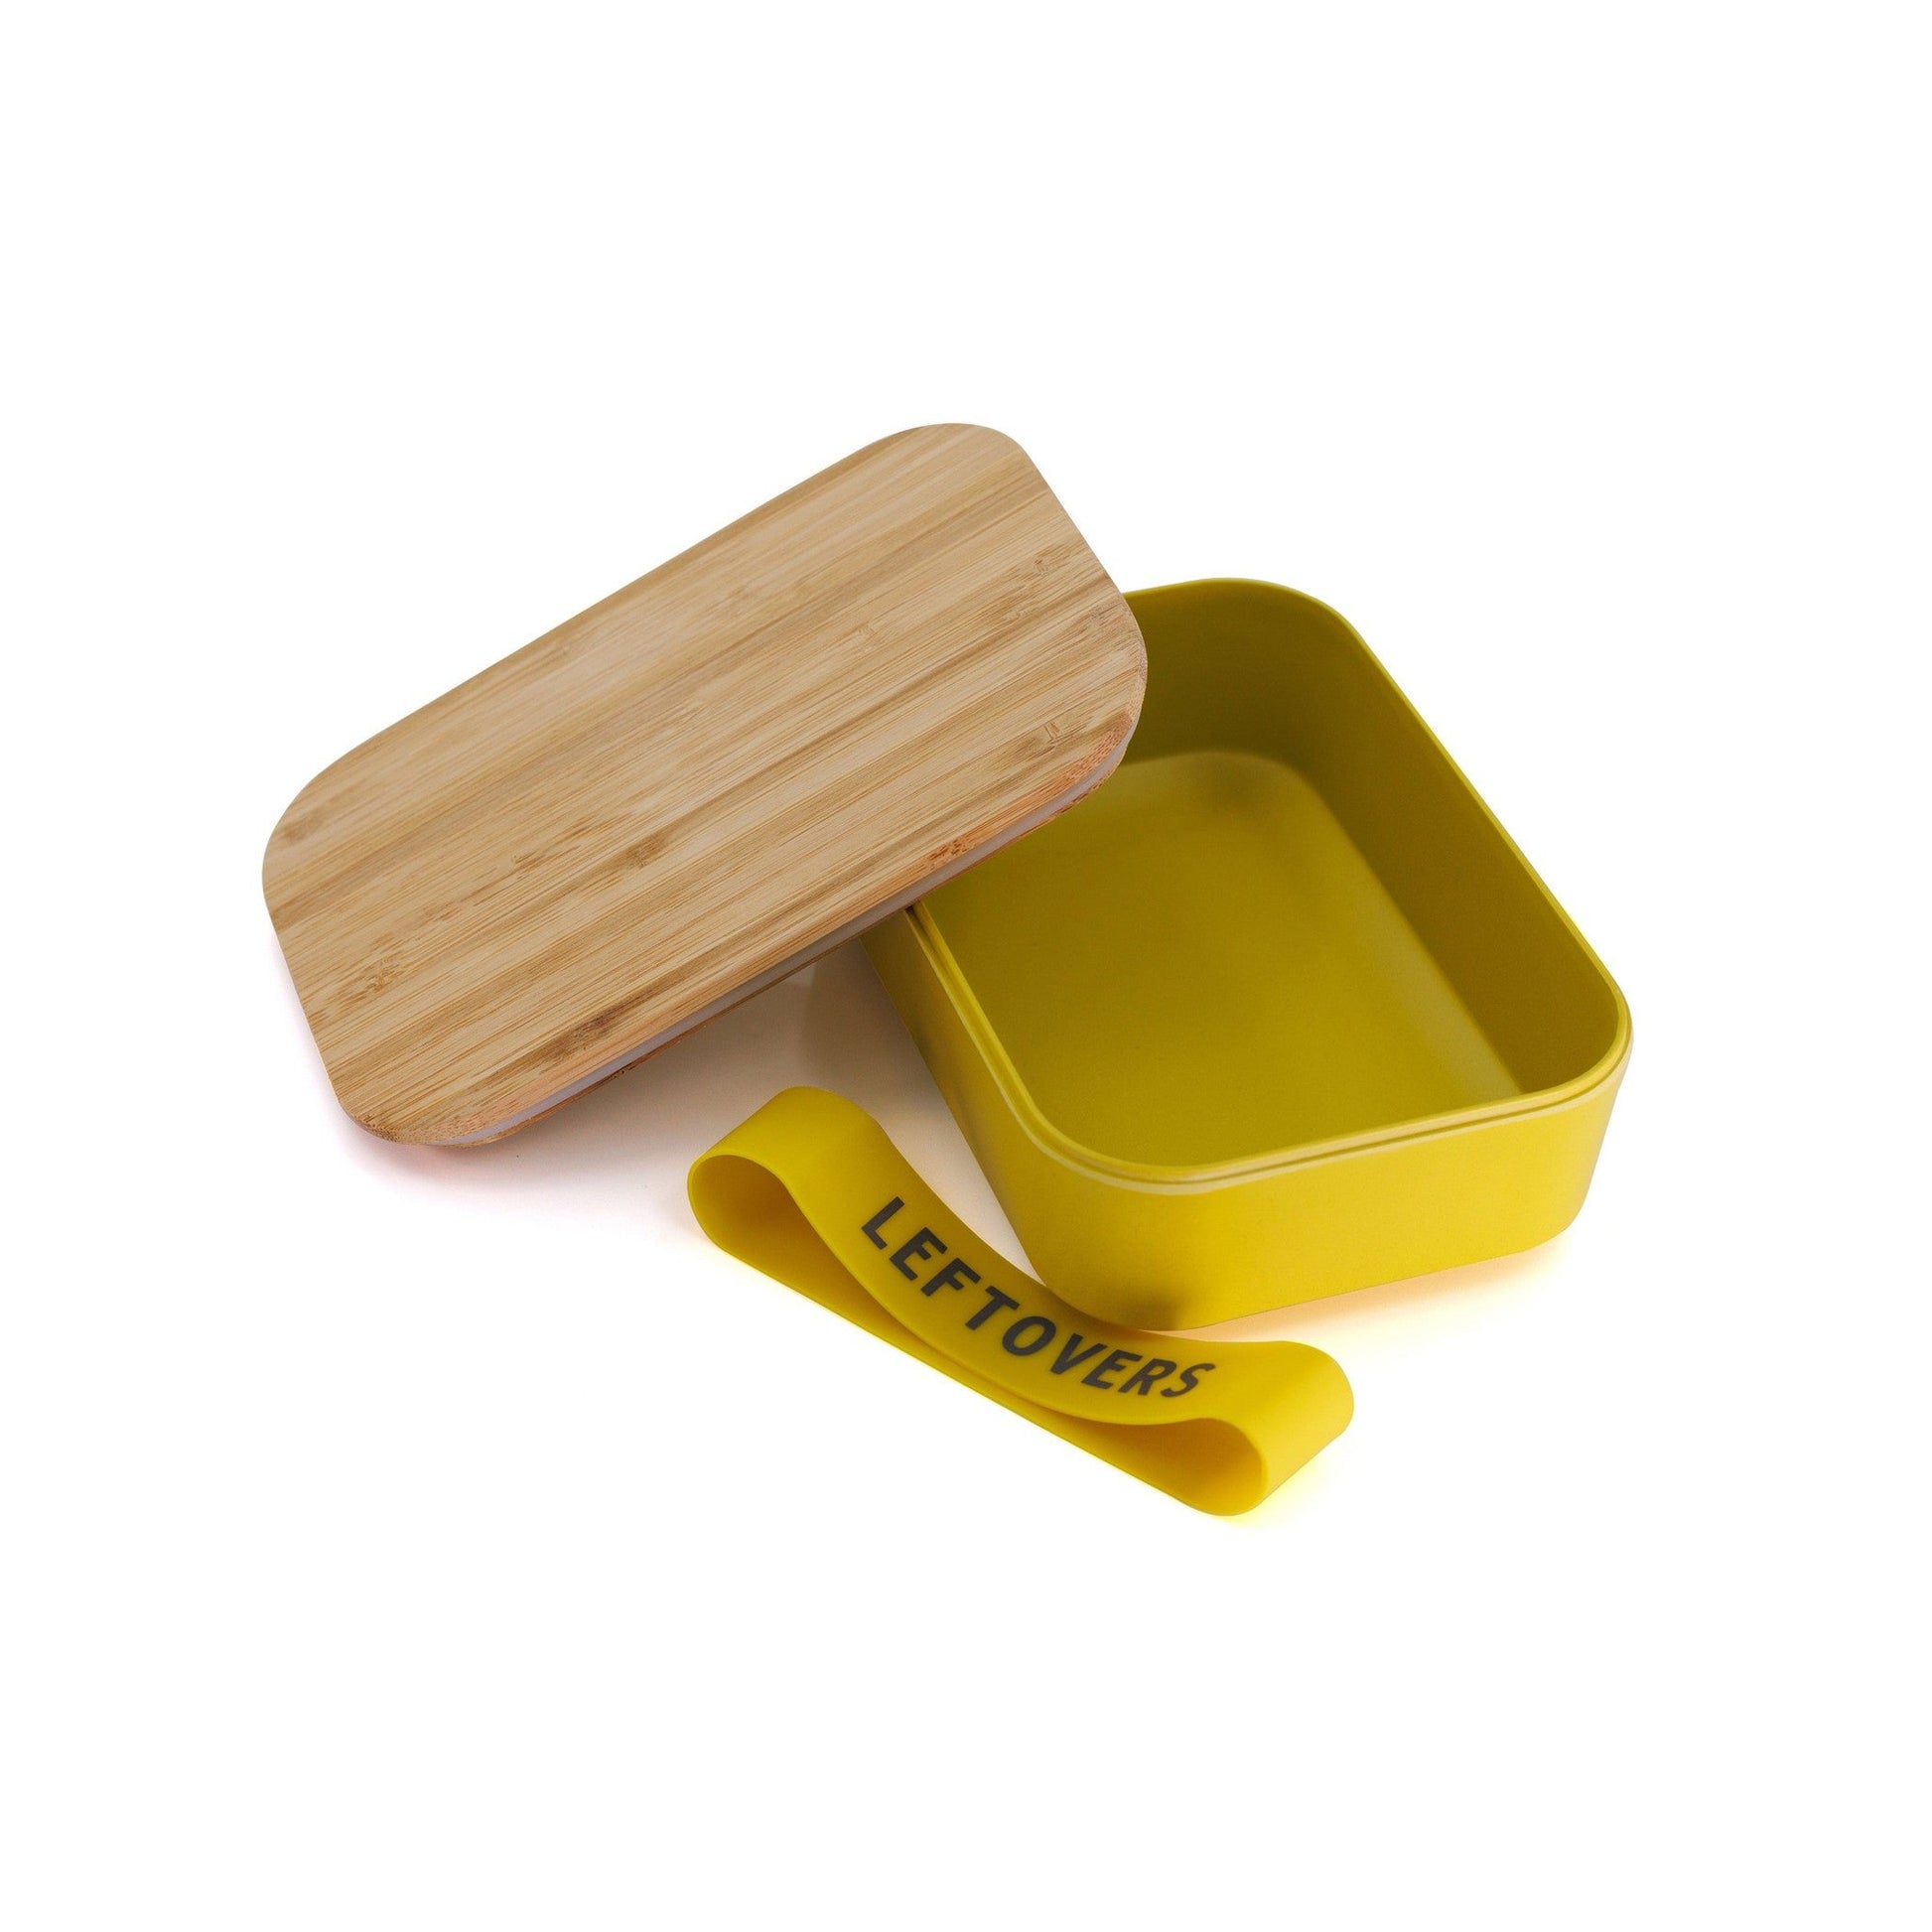 Pack of 3 Leftovers Bamboo Lunch Box in Vivid Yellow